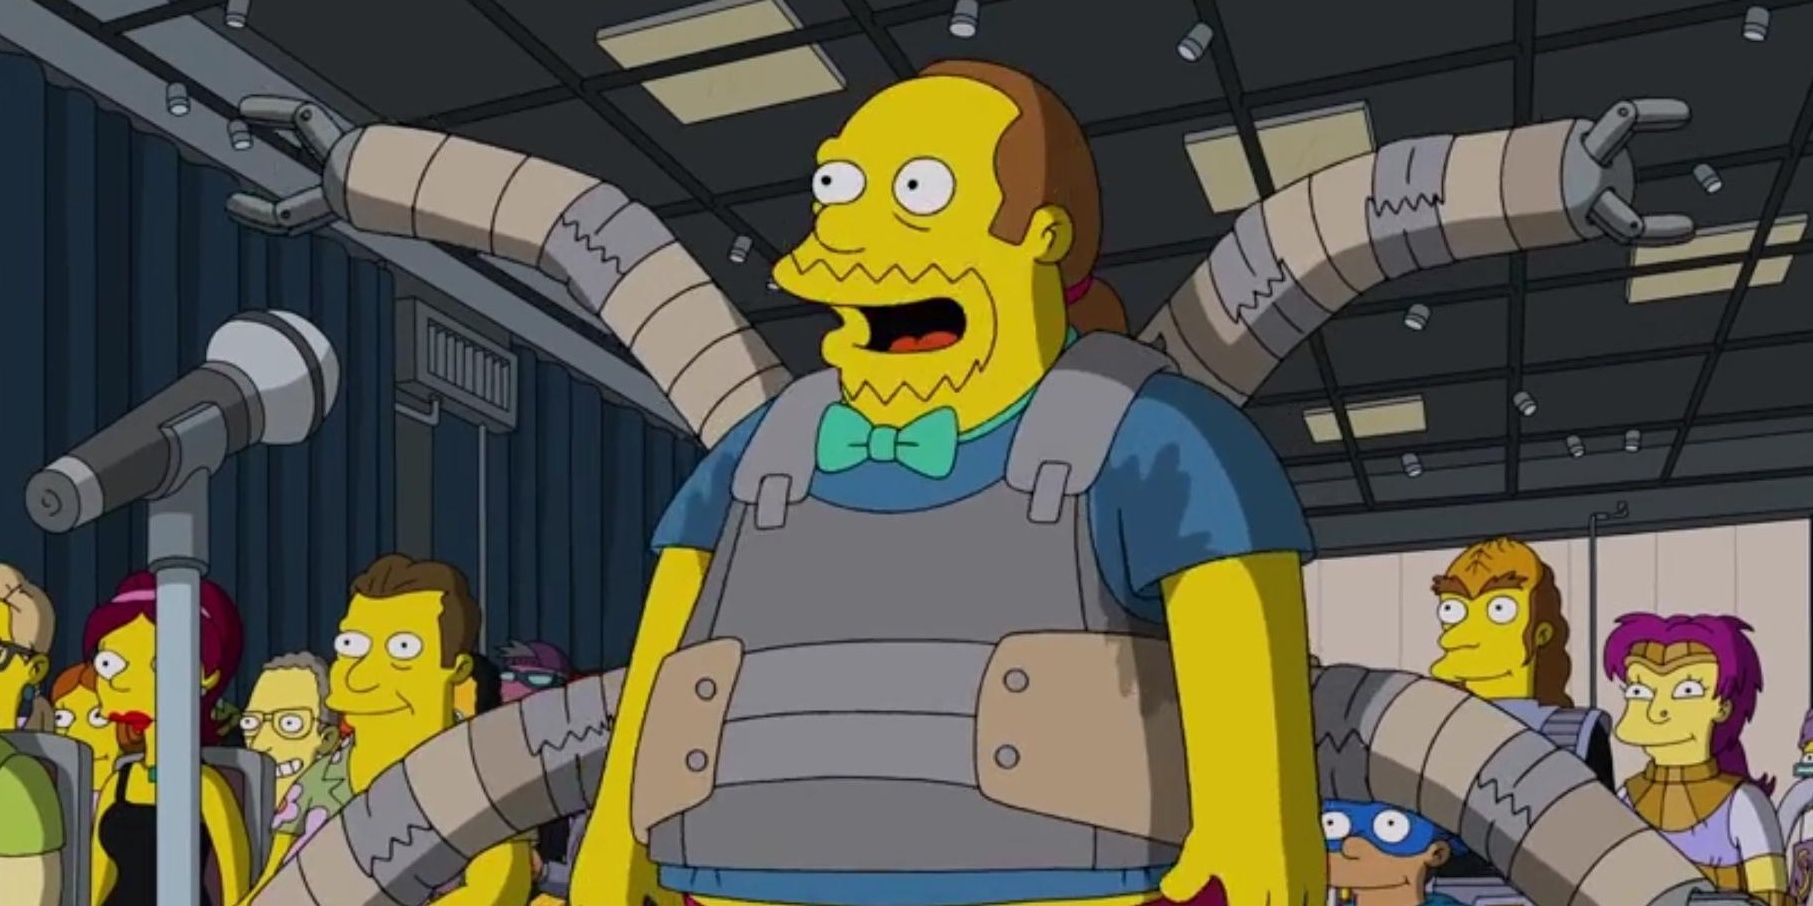 Comic Book Guy prepares to ask his question at Comic Con, to win his dream Marvel job.